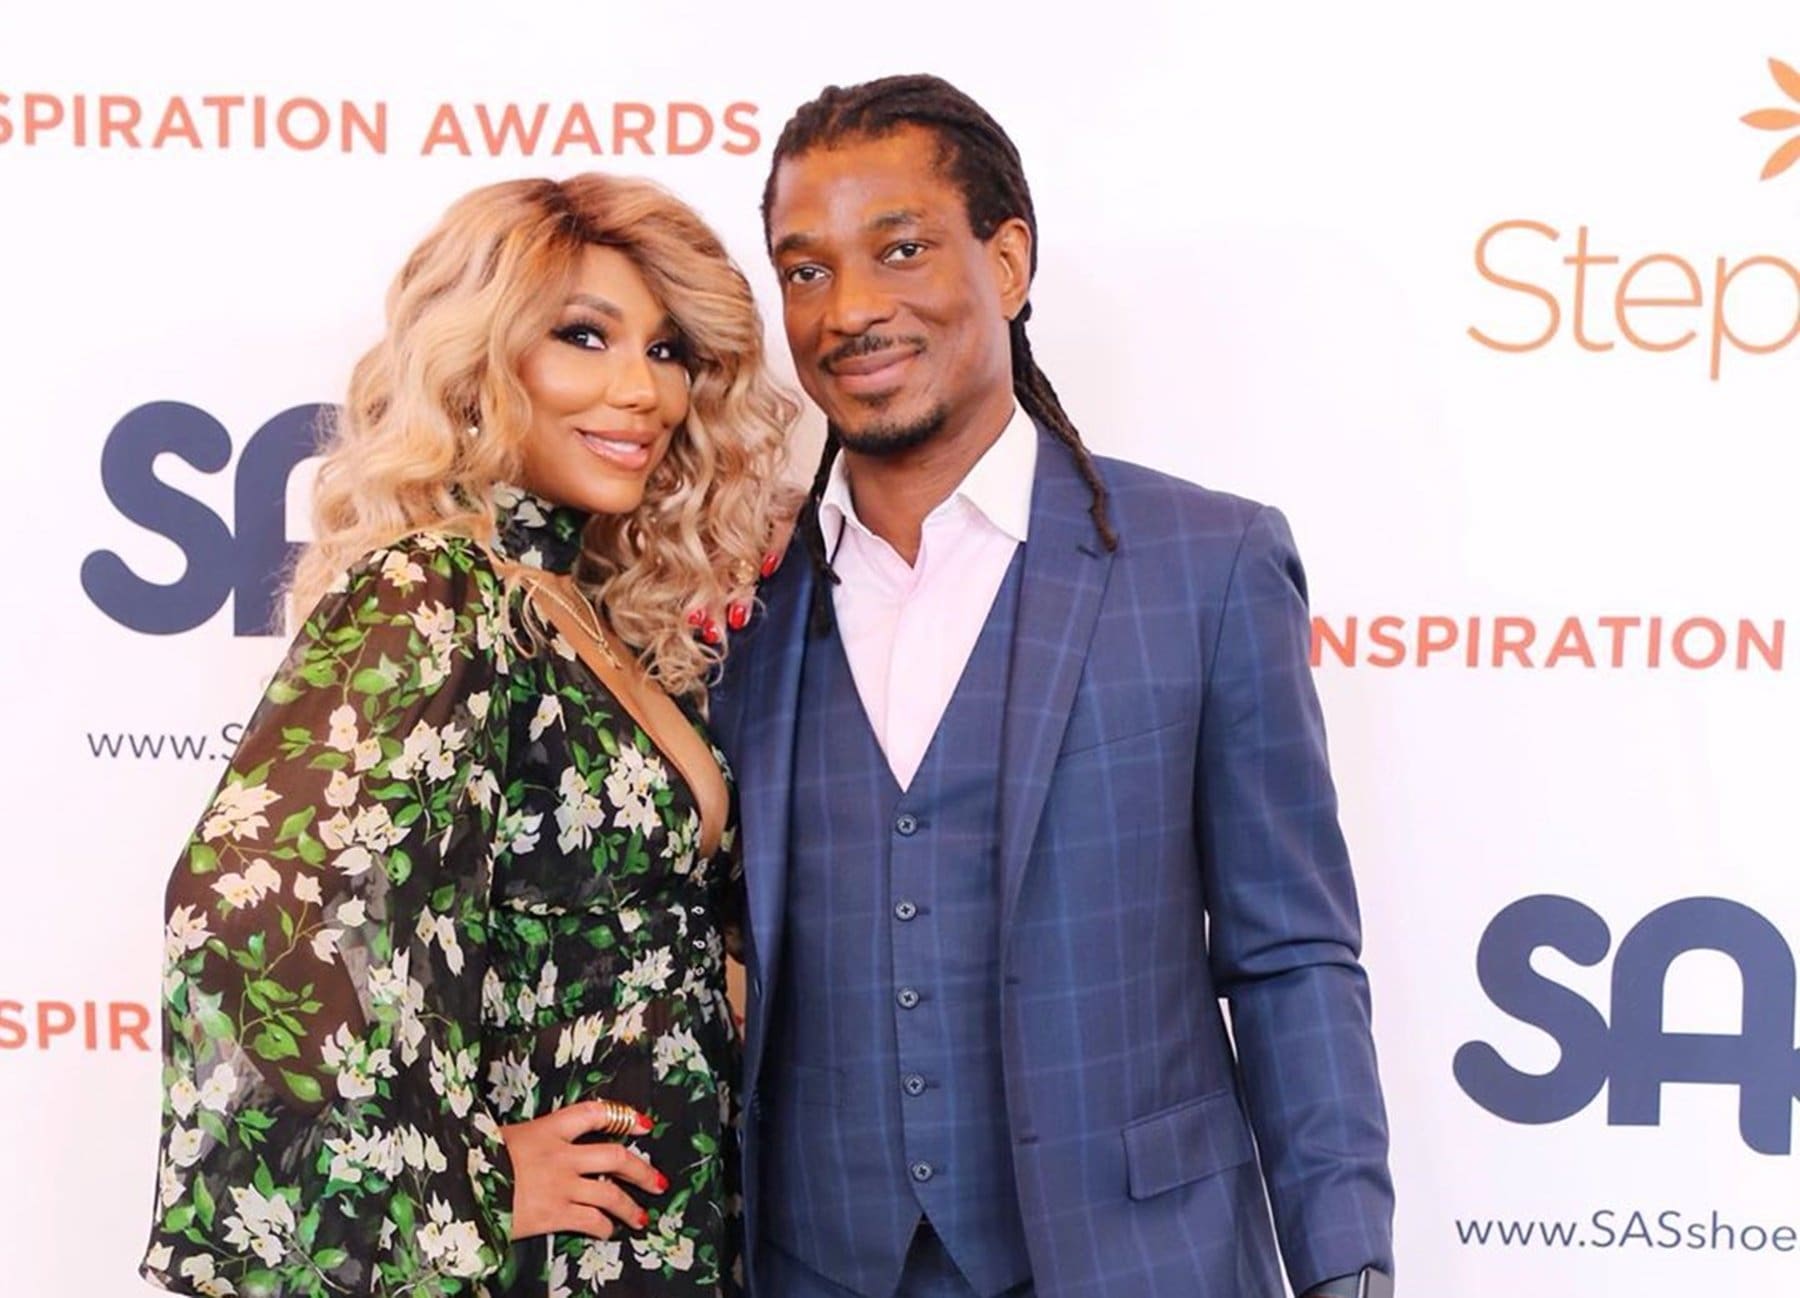 Tamar Braxton's BF, David Adefeso Is Working To Help Millions Of Kids Avoid Student Loans